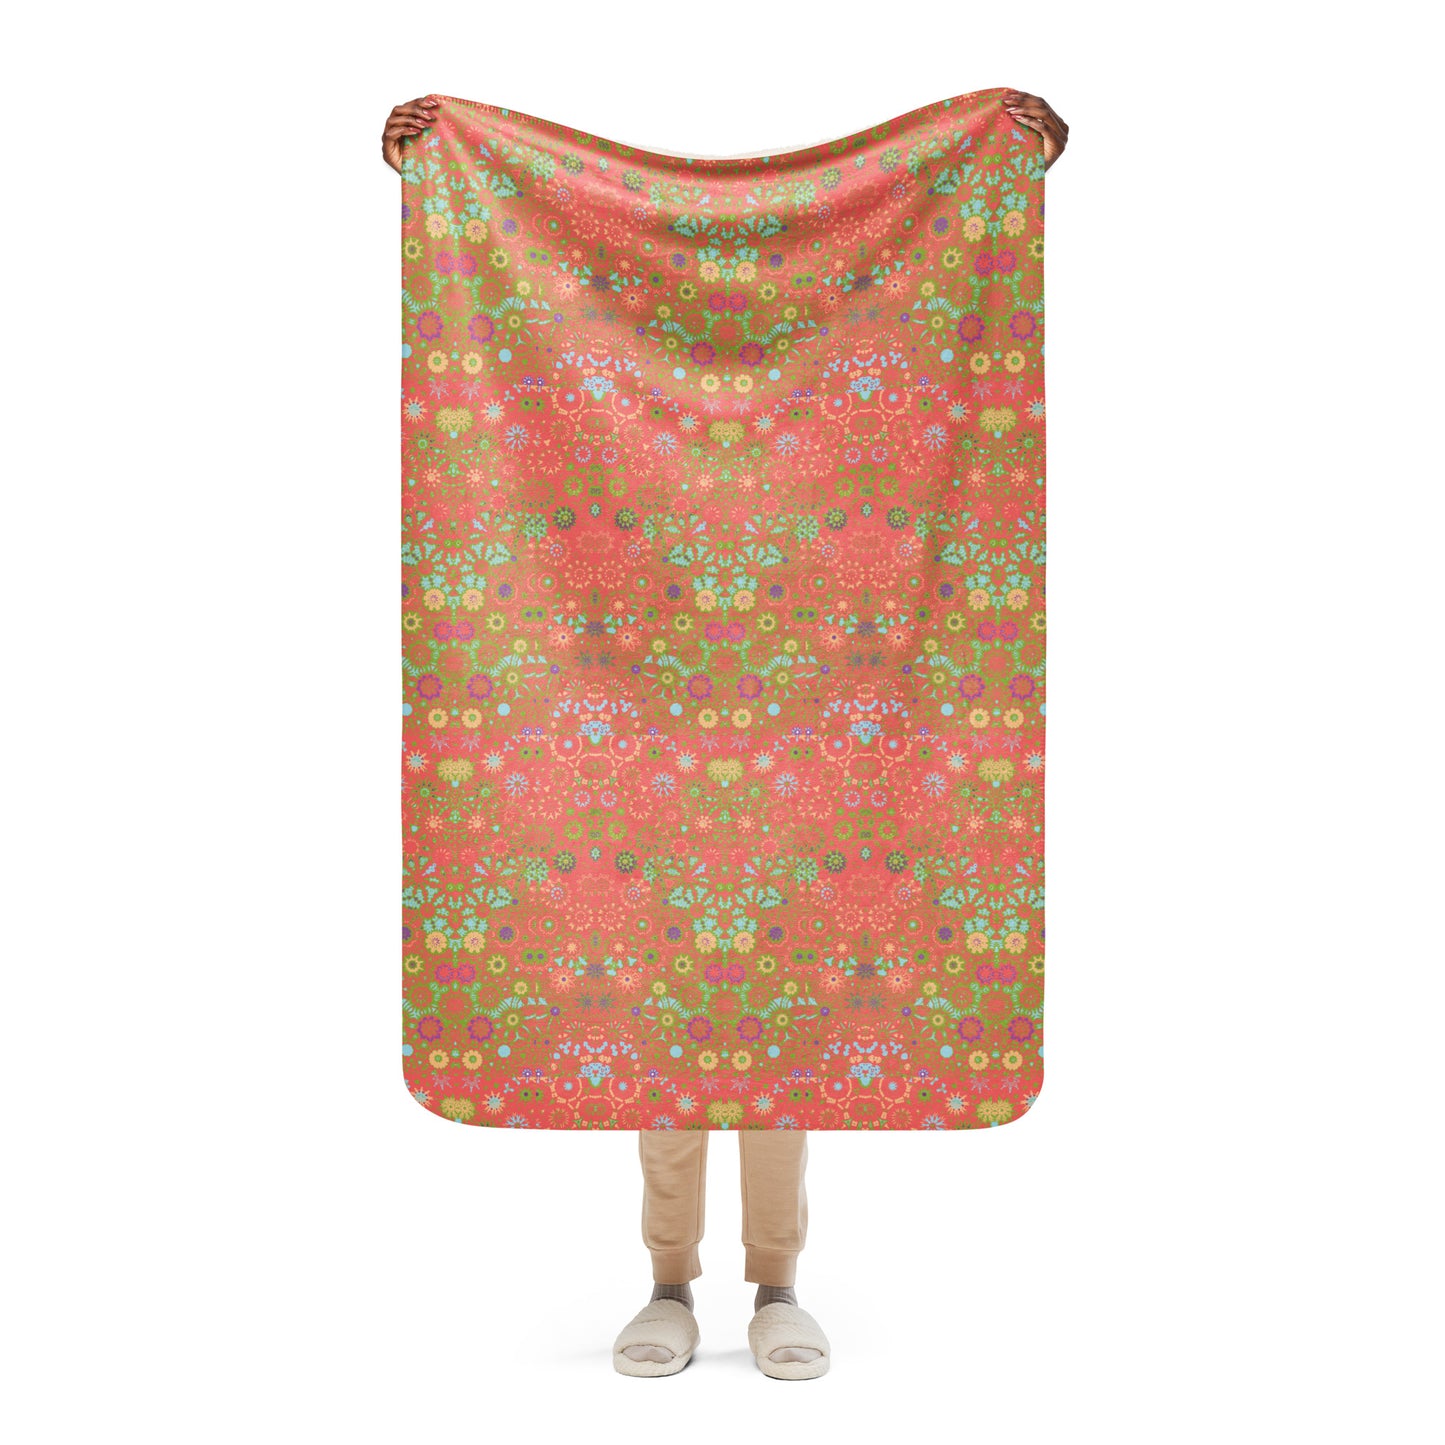 Daisy Delight Coral Sherpa Blanket